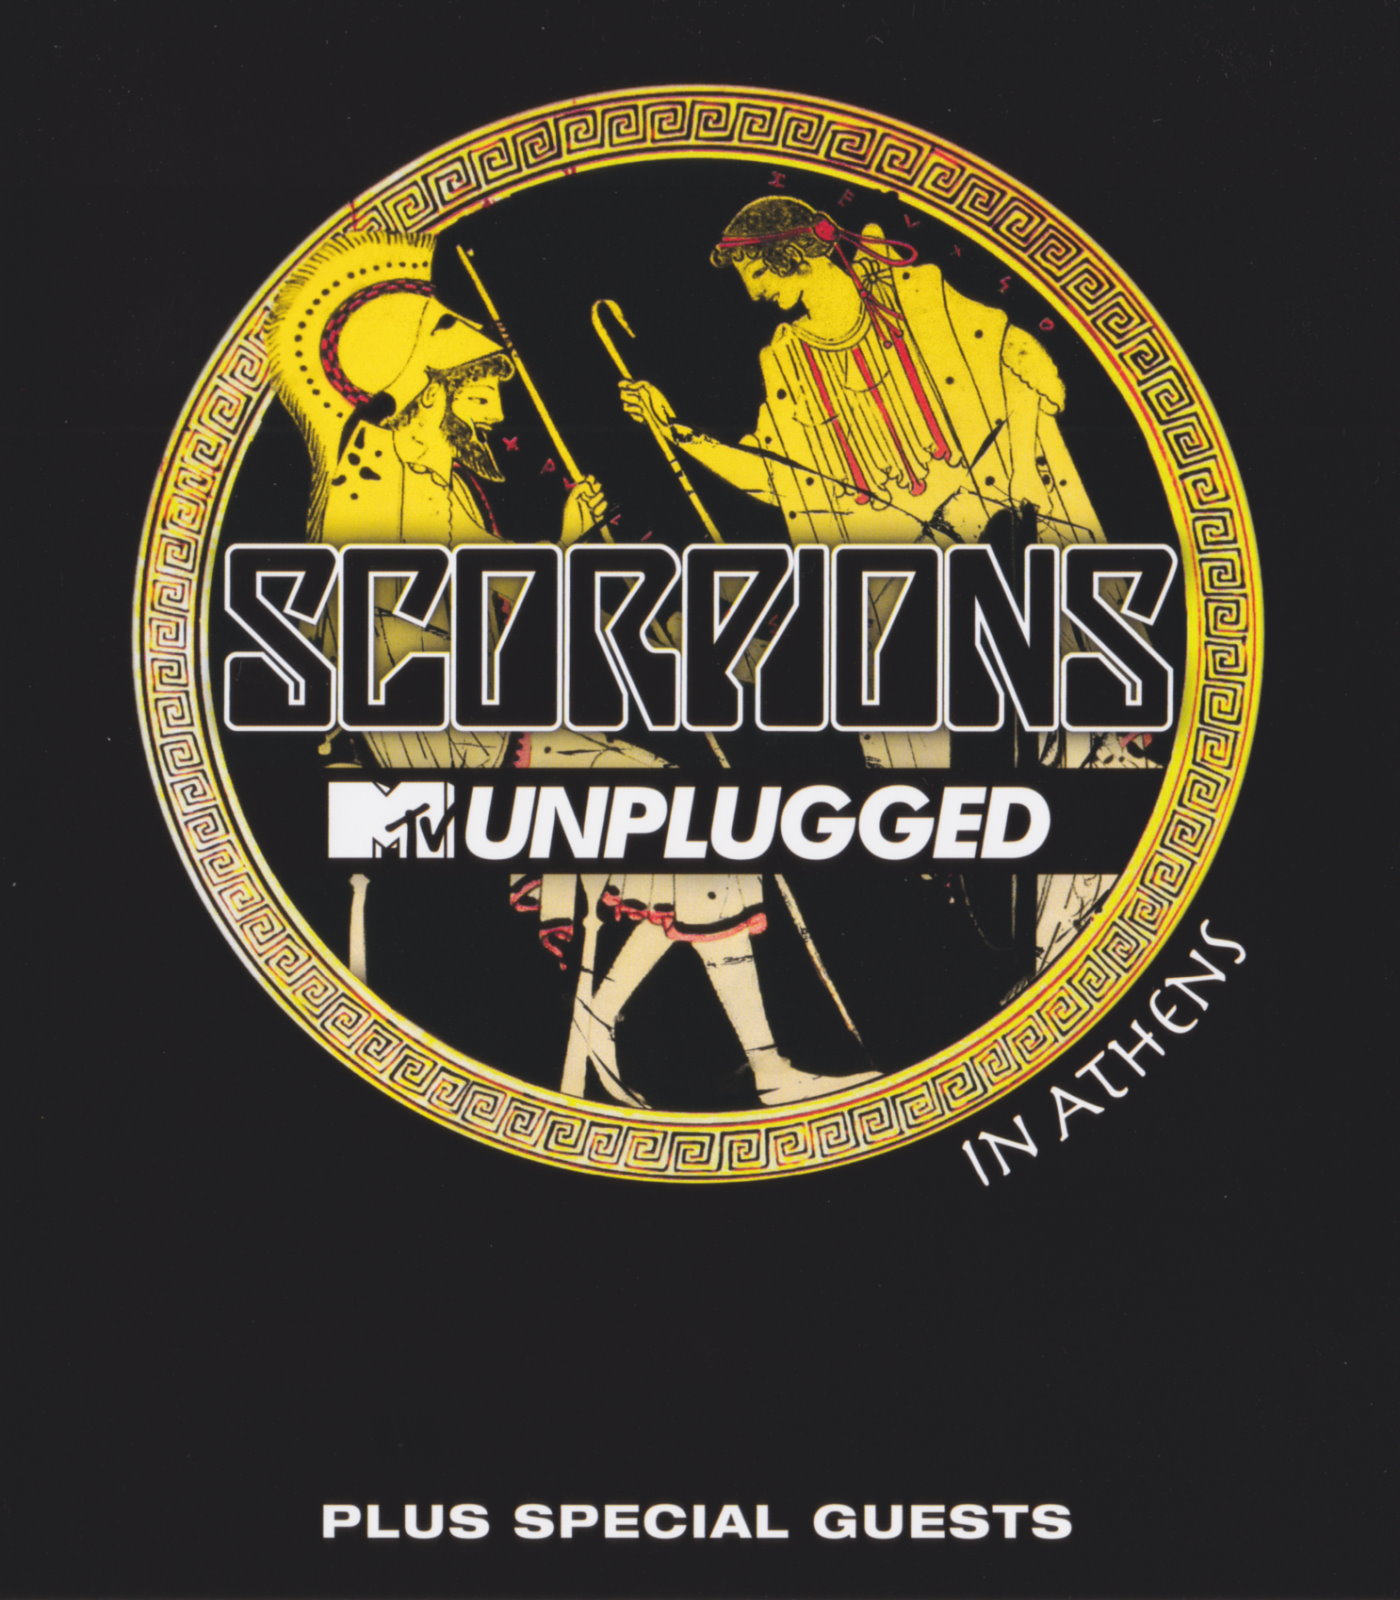 Cover - Scorpions - MTV Unplugged in Athens.jpg